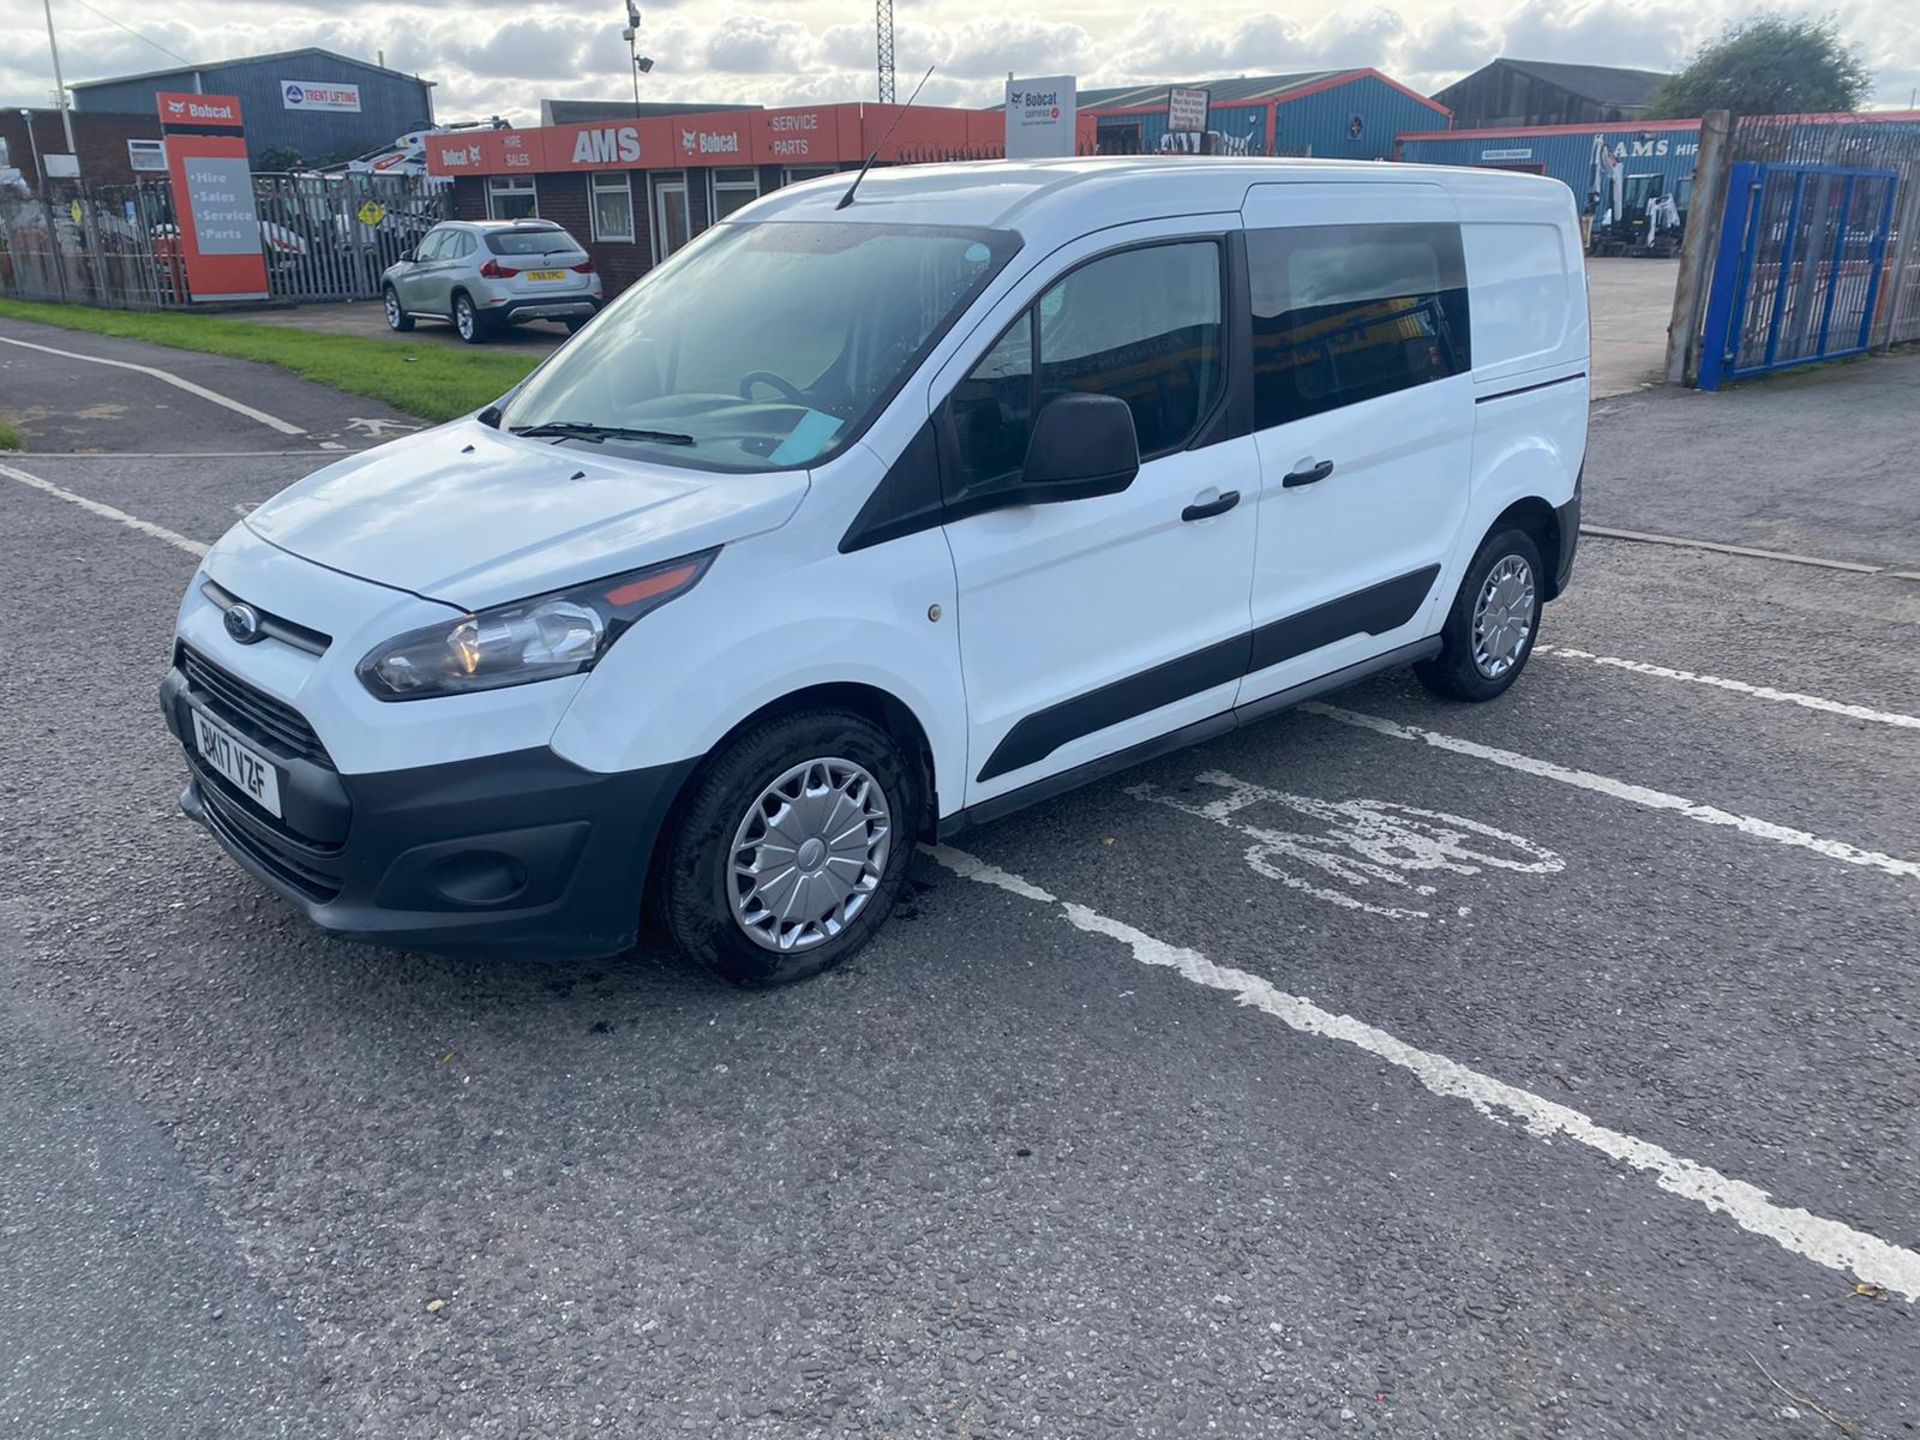 2017 17 FORD TRANSIT CONNECT DOUBLE CAB PANEL VAN - 118K MILES - 5 SEATS - LWB - EURO 6. - Image 3 of 11